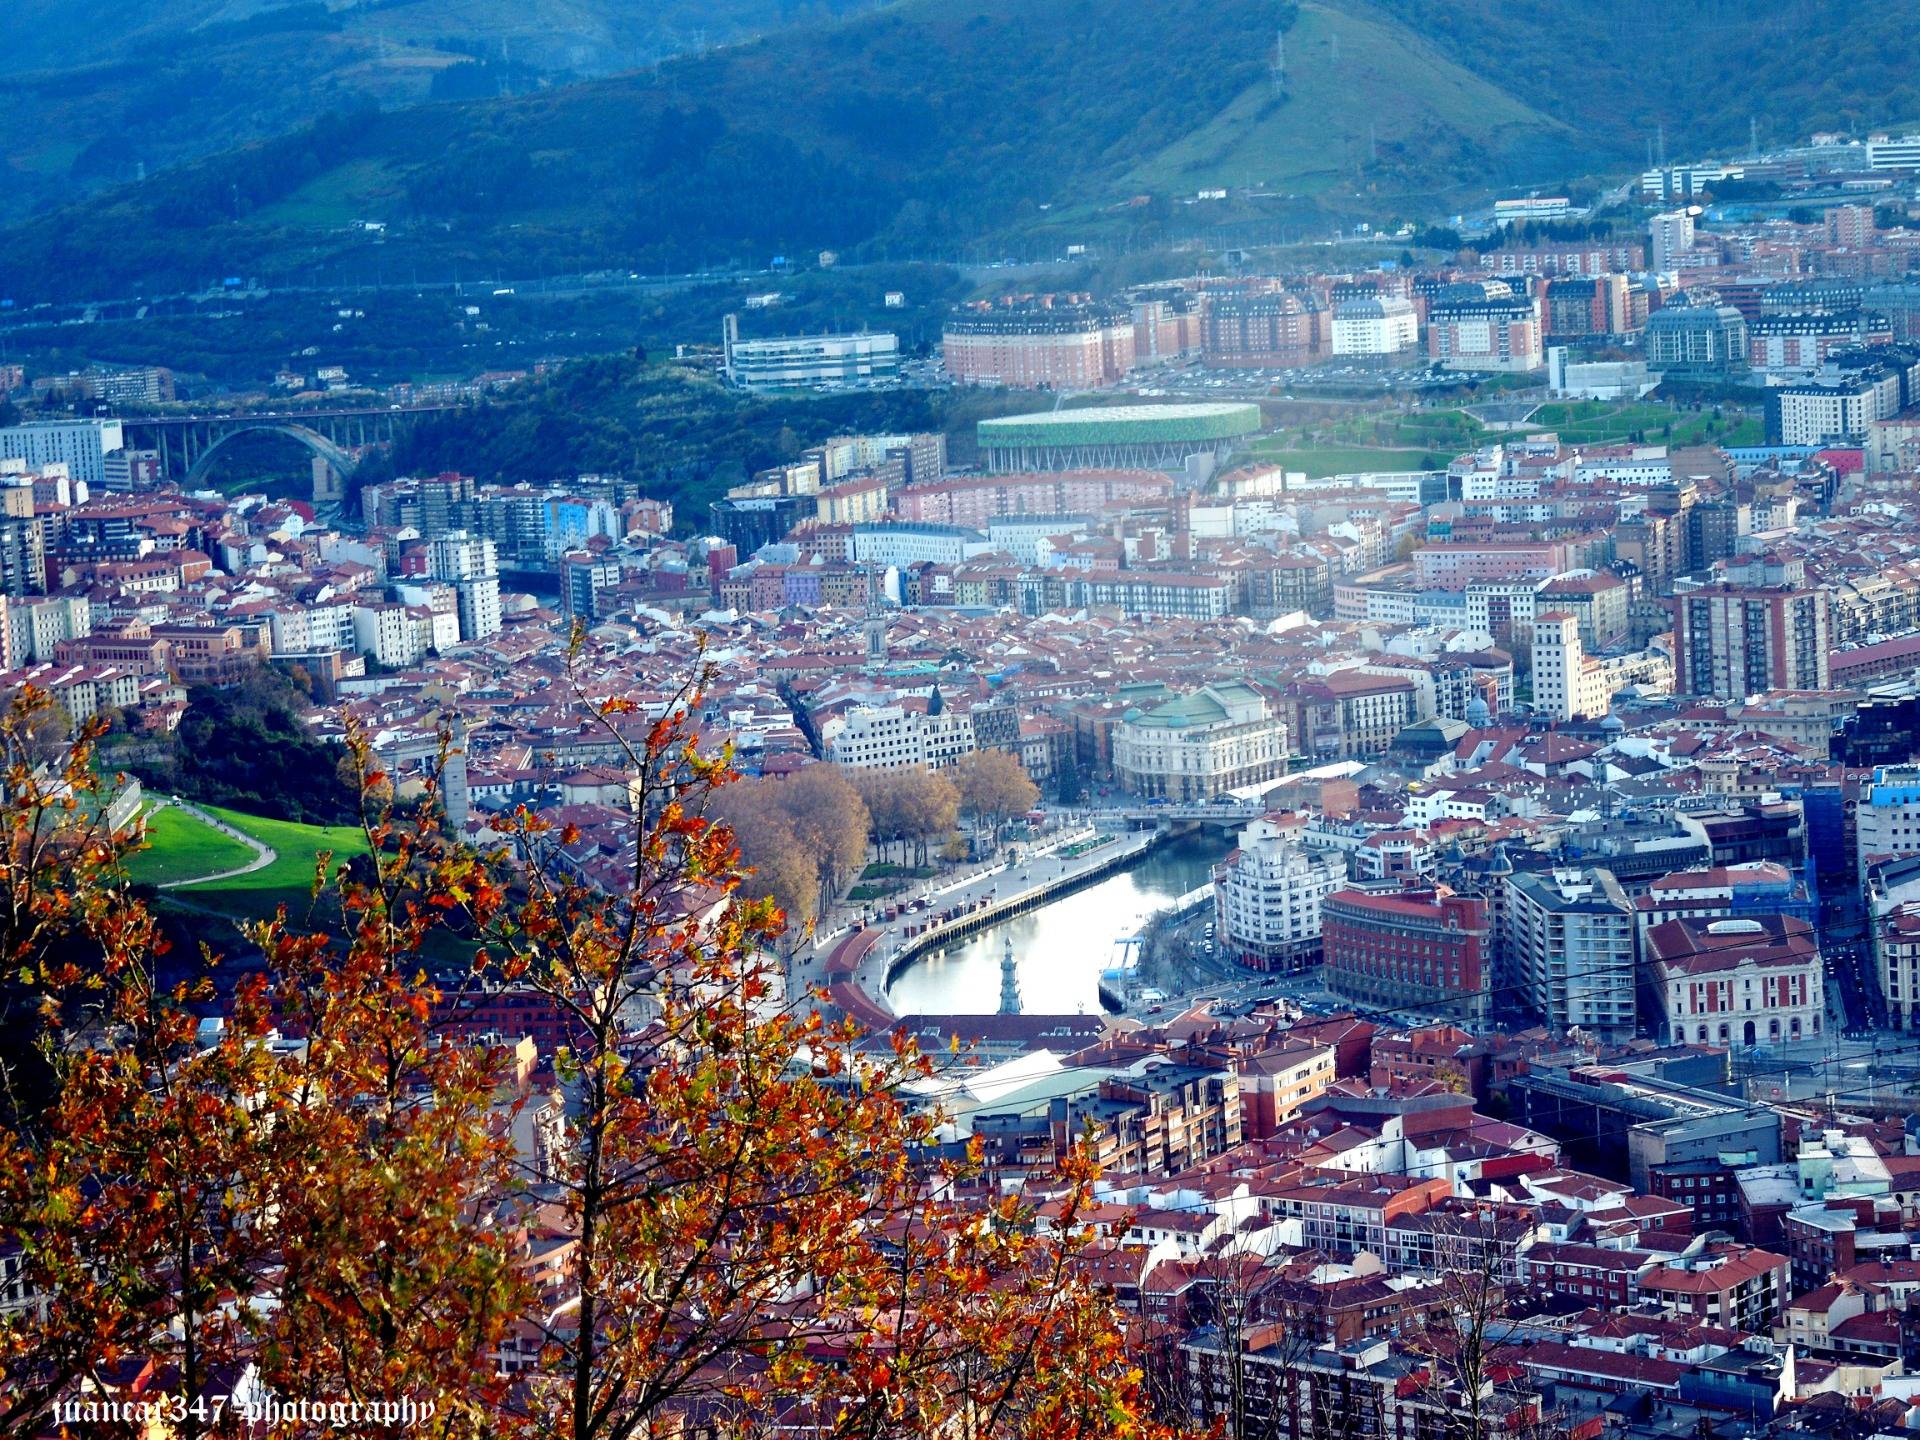 The estuary and the mountains that surround Bilbao